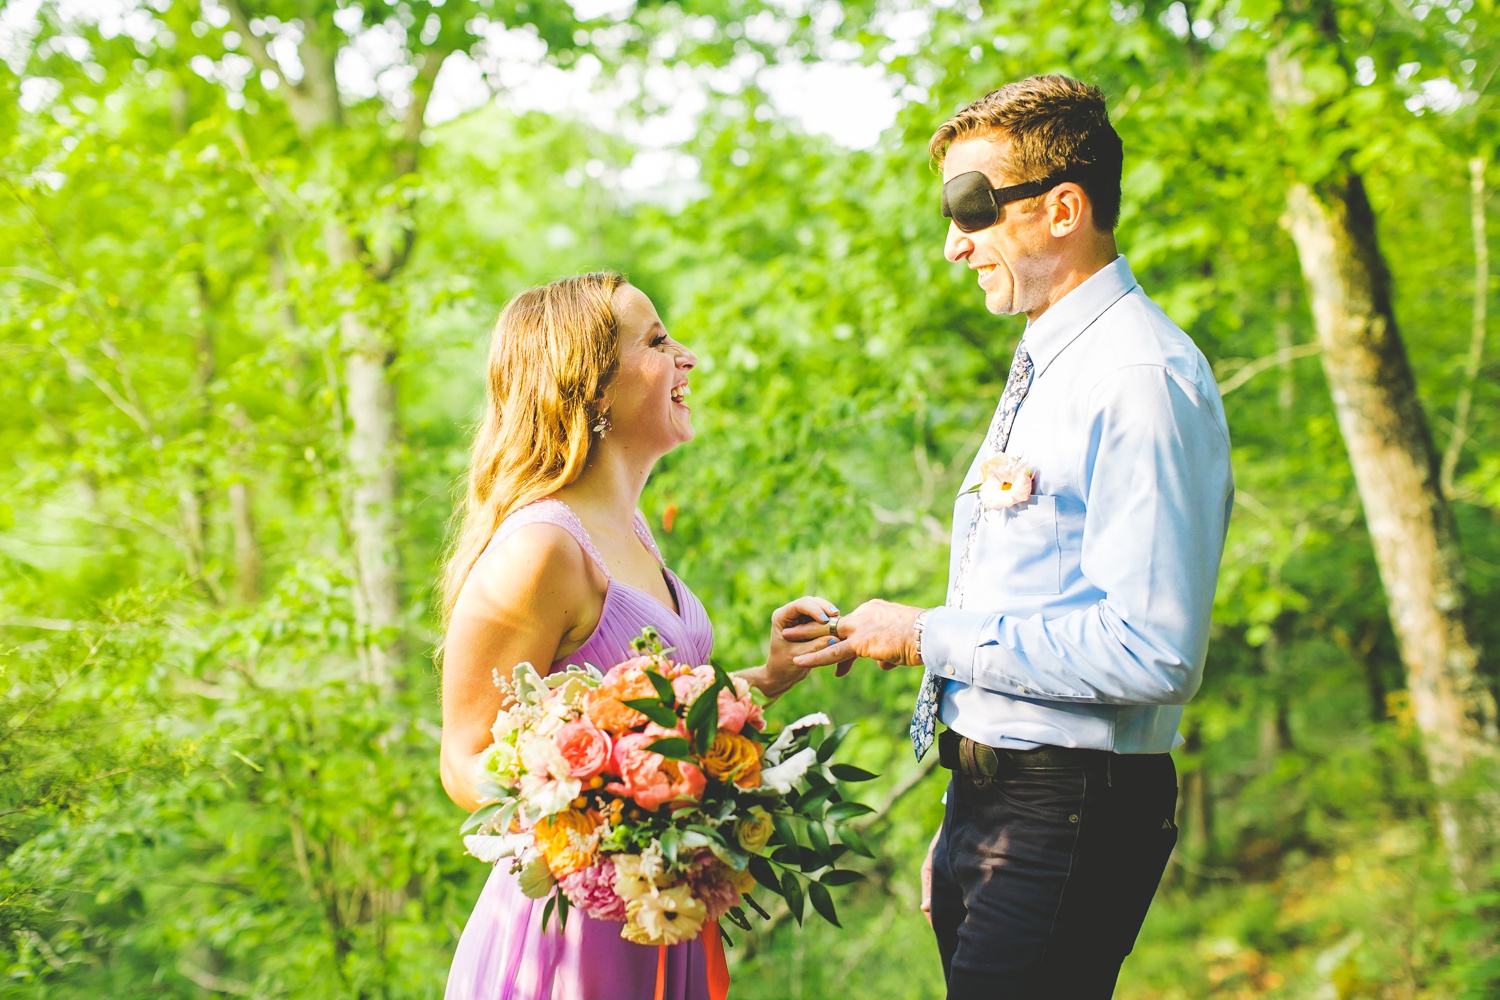 Colorful Forest Elopement in Arkansas